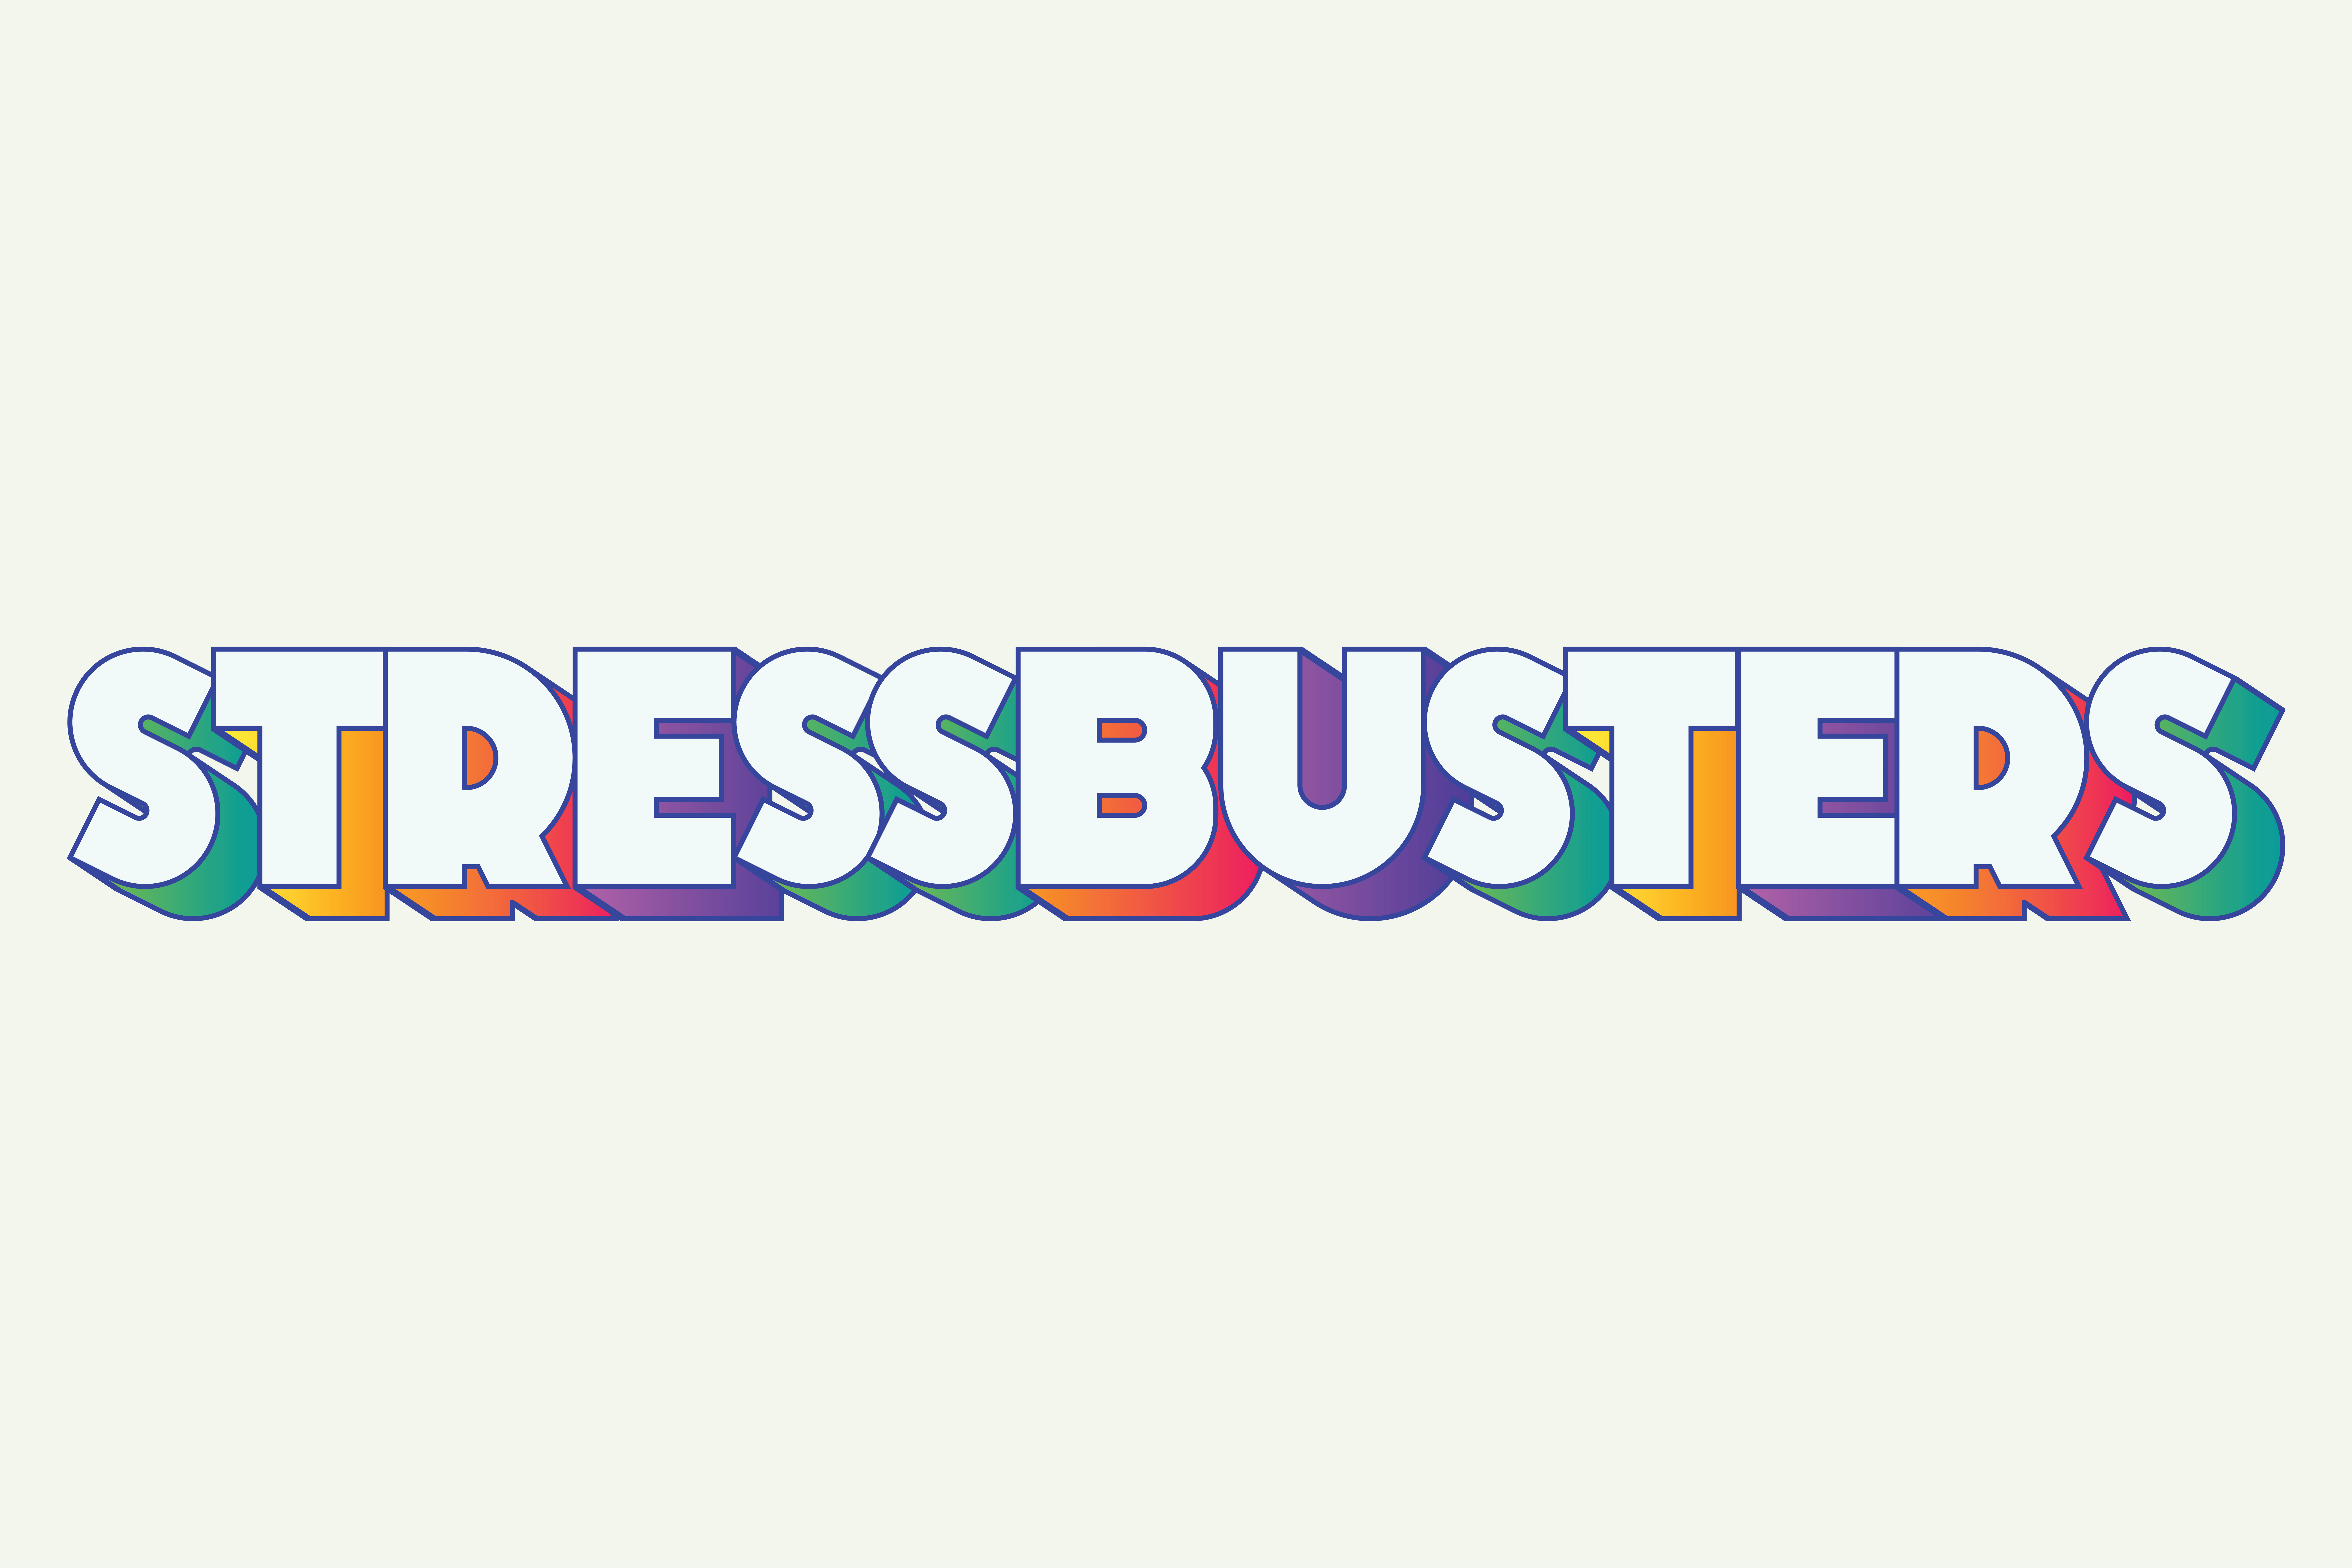 Stressbusters logo